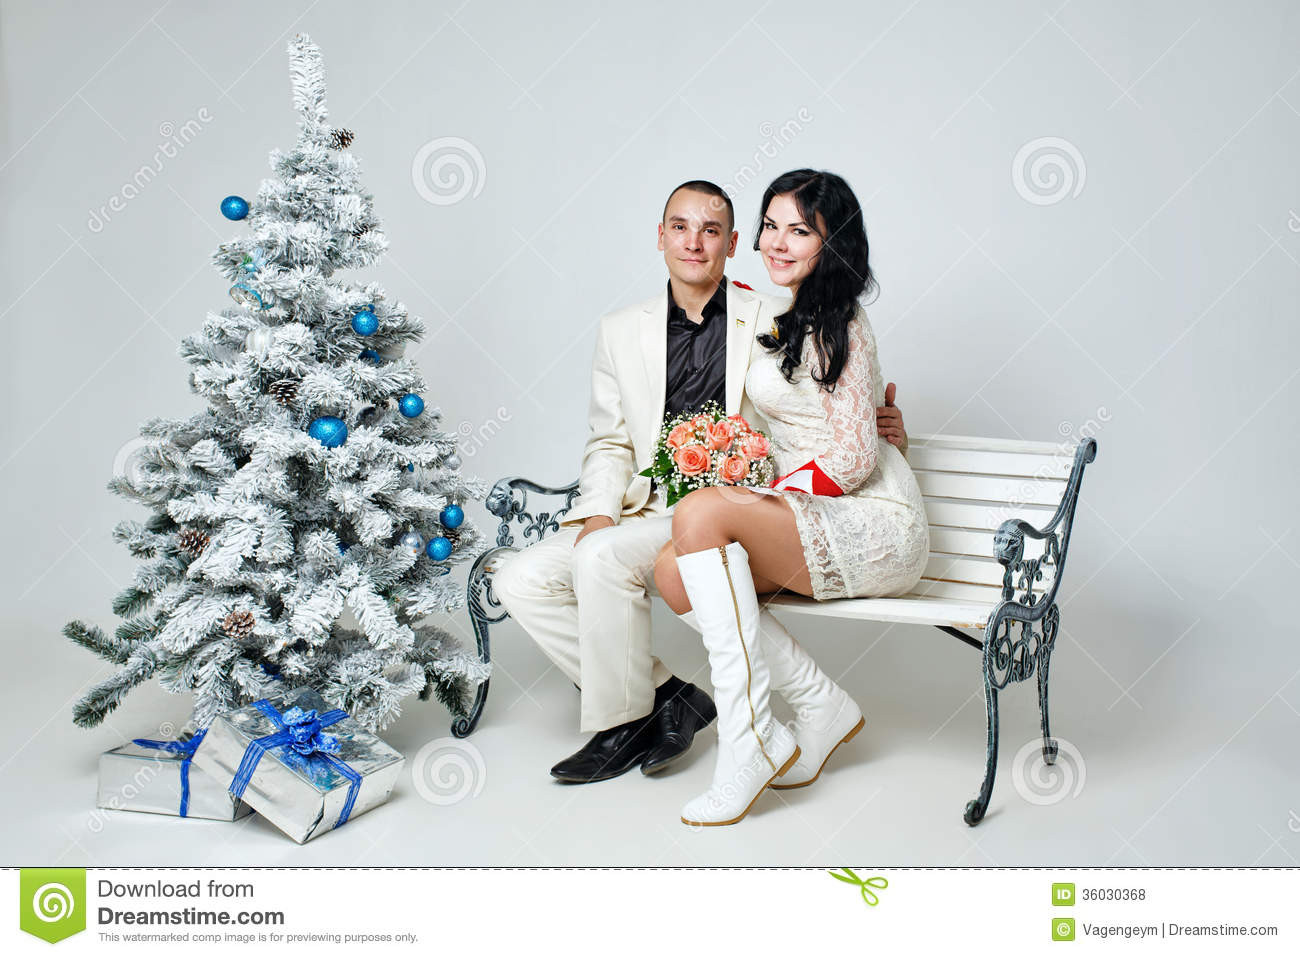 Christmas Gift Ideas For Young Married Couples
 Couple And Christmas Royalty Free Stock s Image